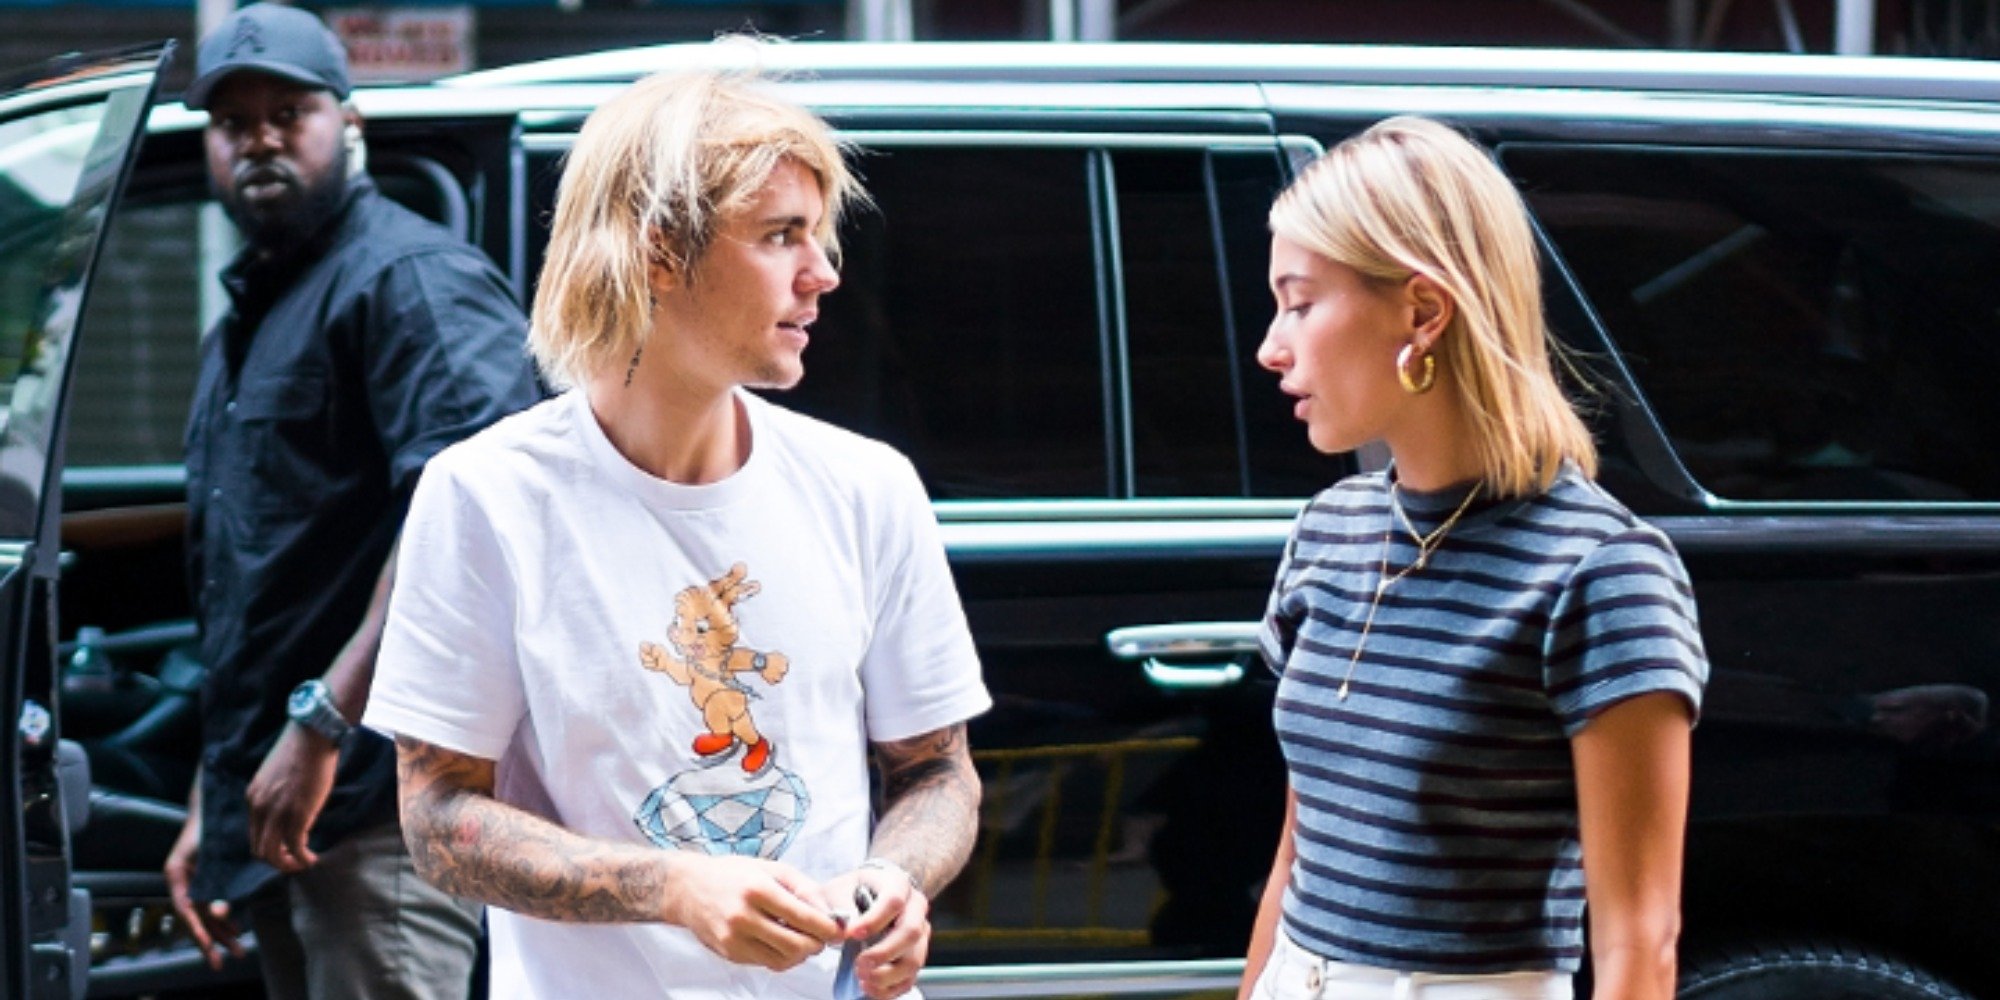 Justin and Hailey Bieber attend services at Hillsong Church in New York City in 2018.